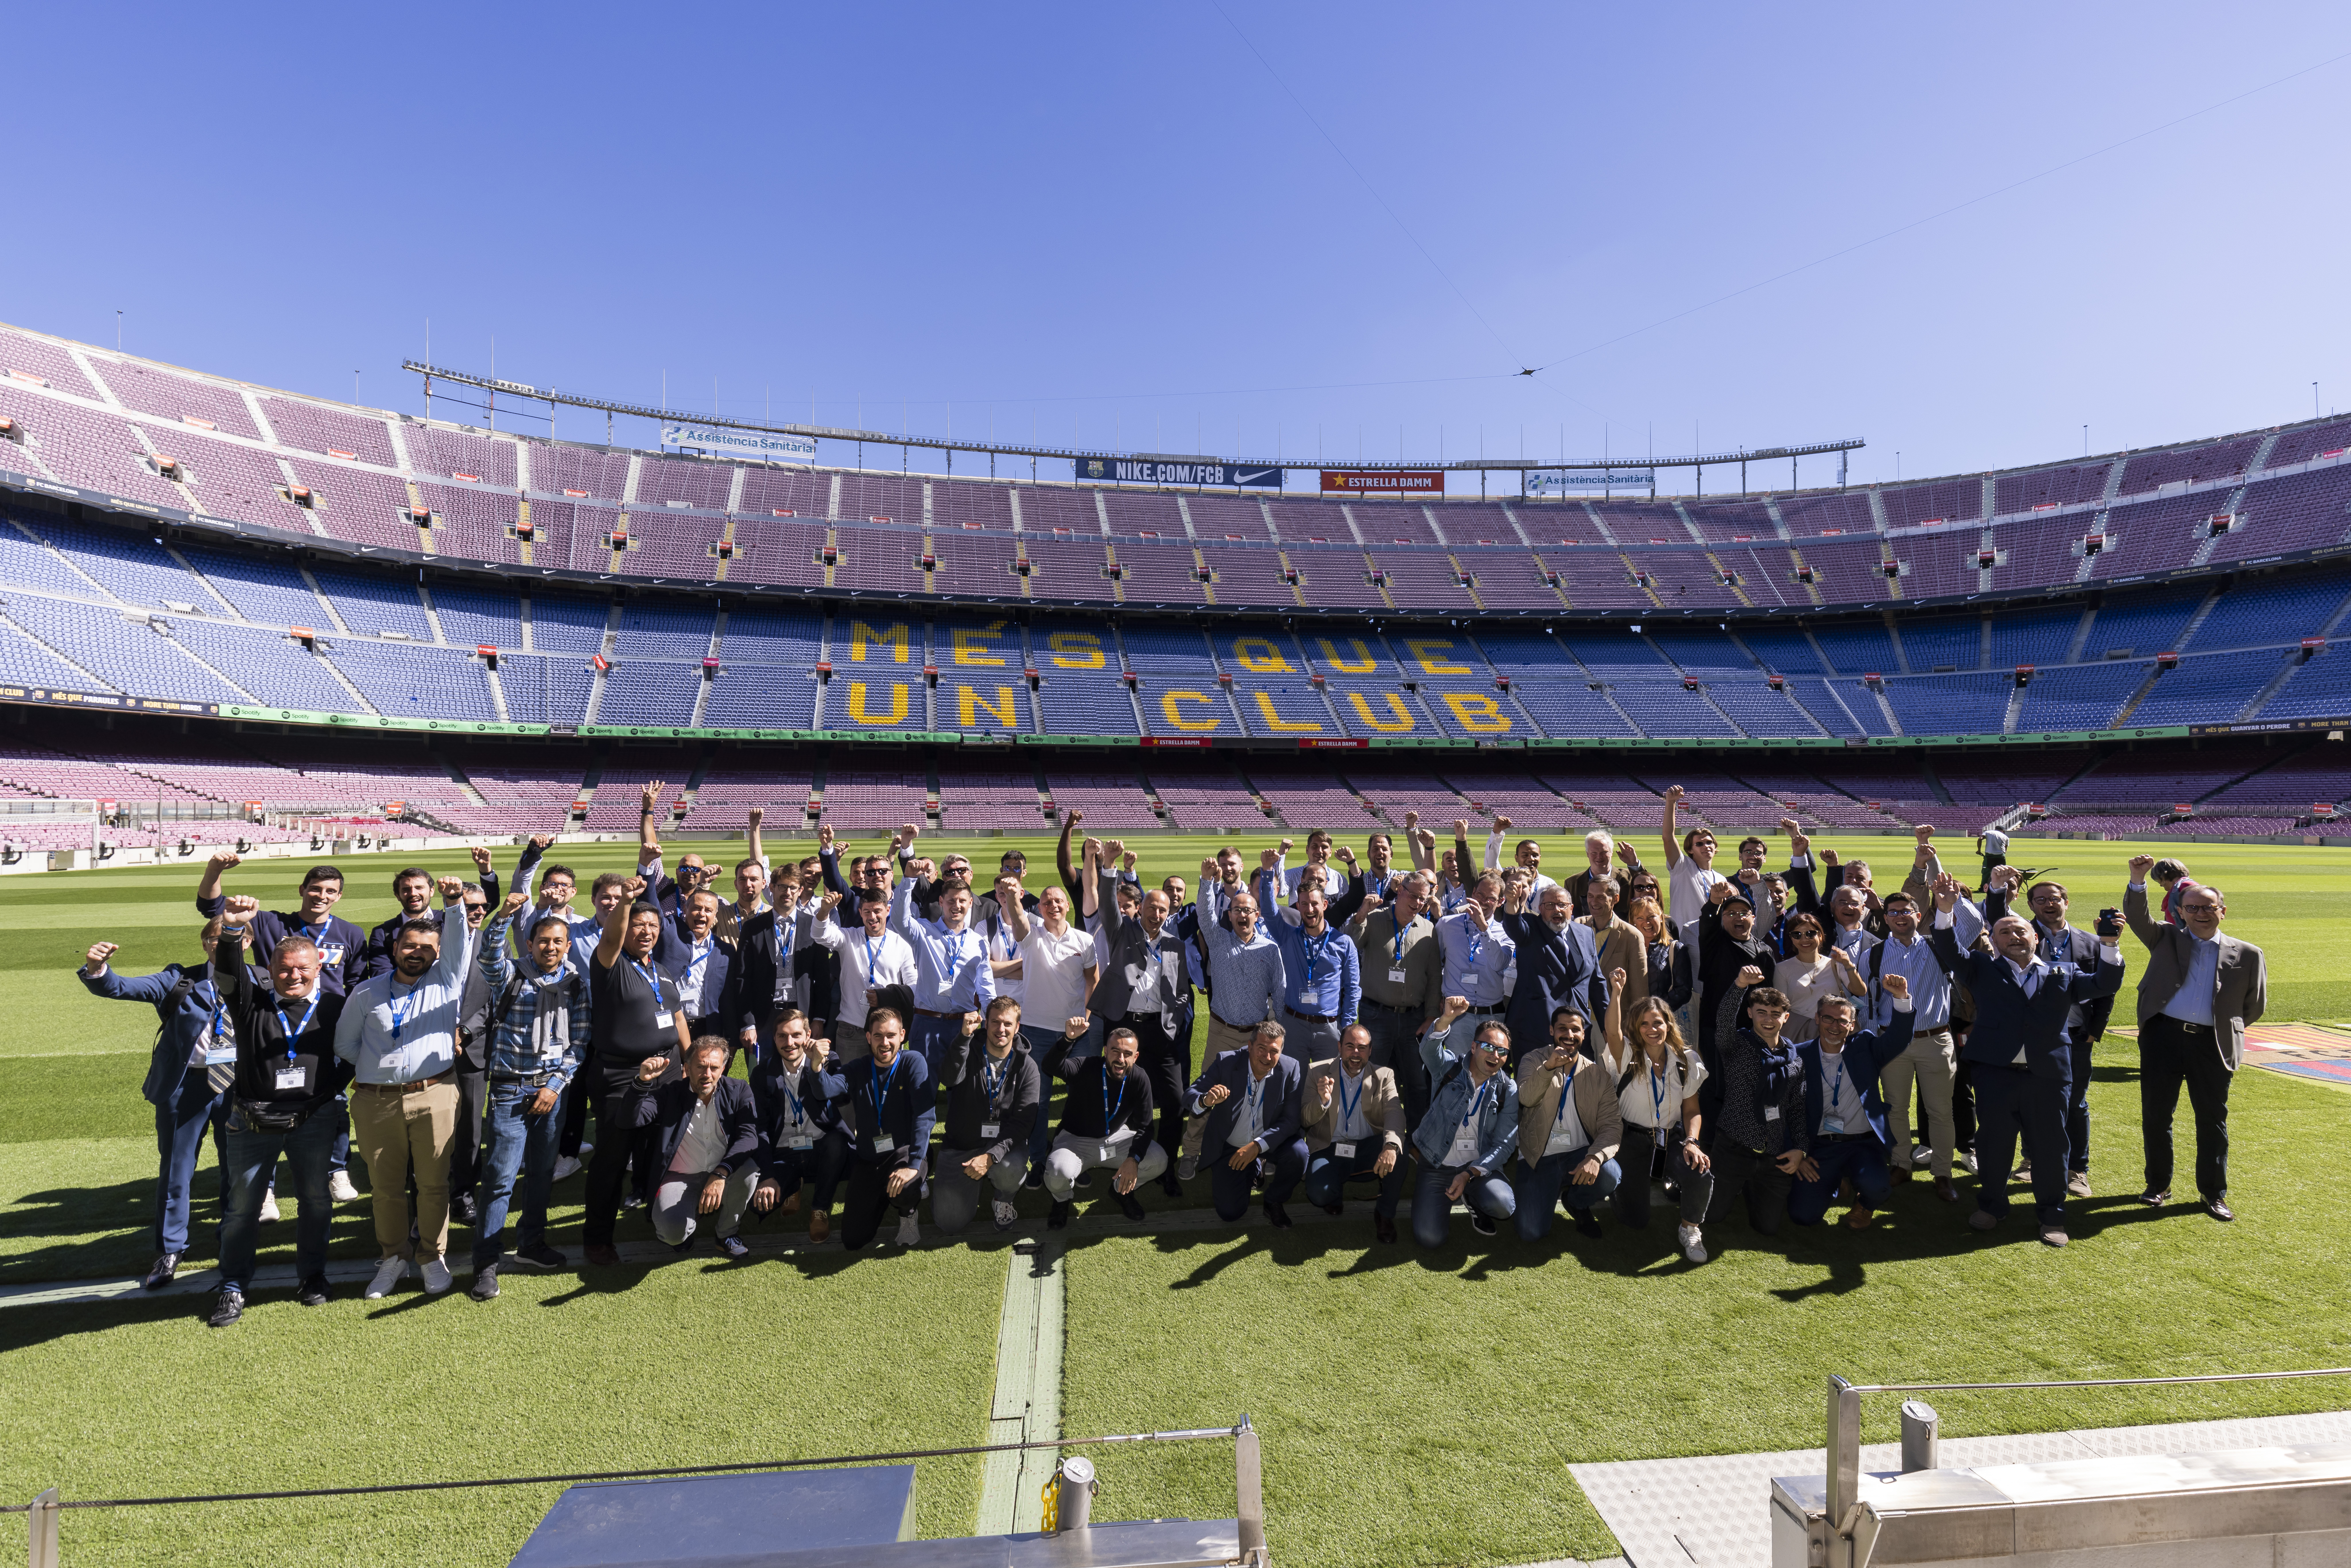 The end of the seminar at FC Barcelona Stadium